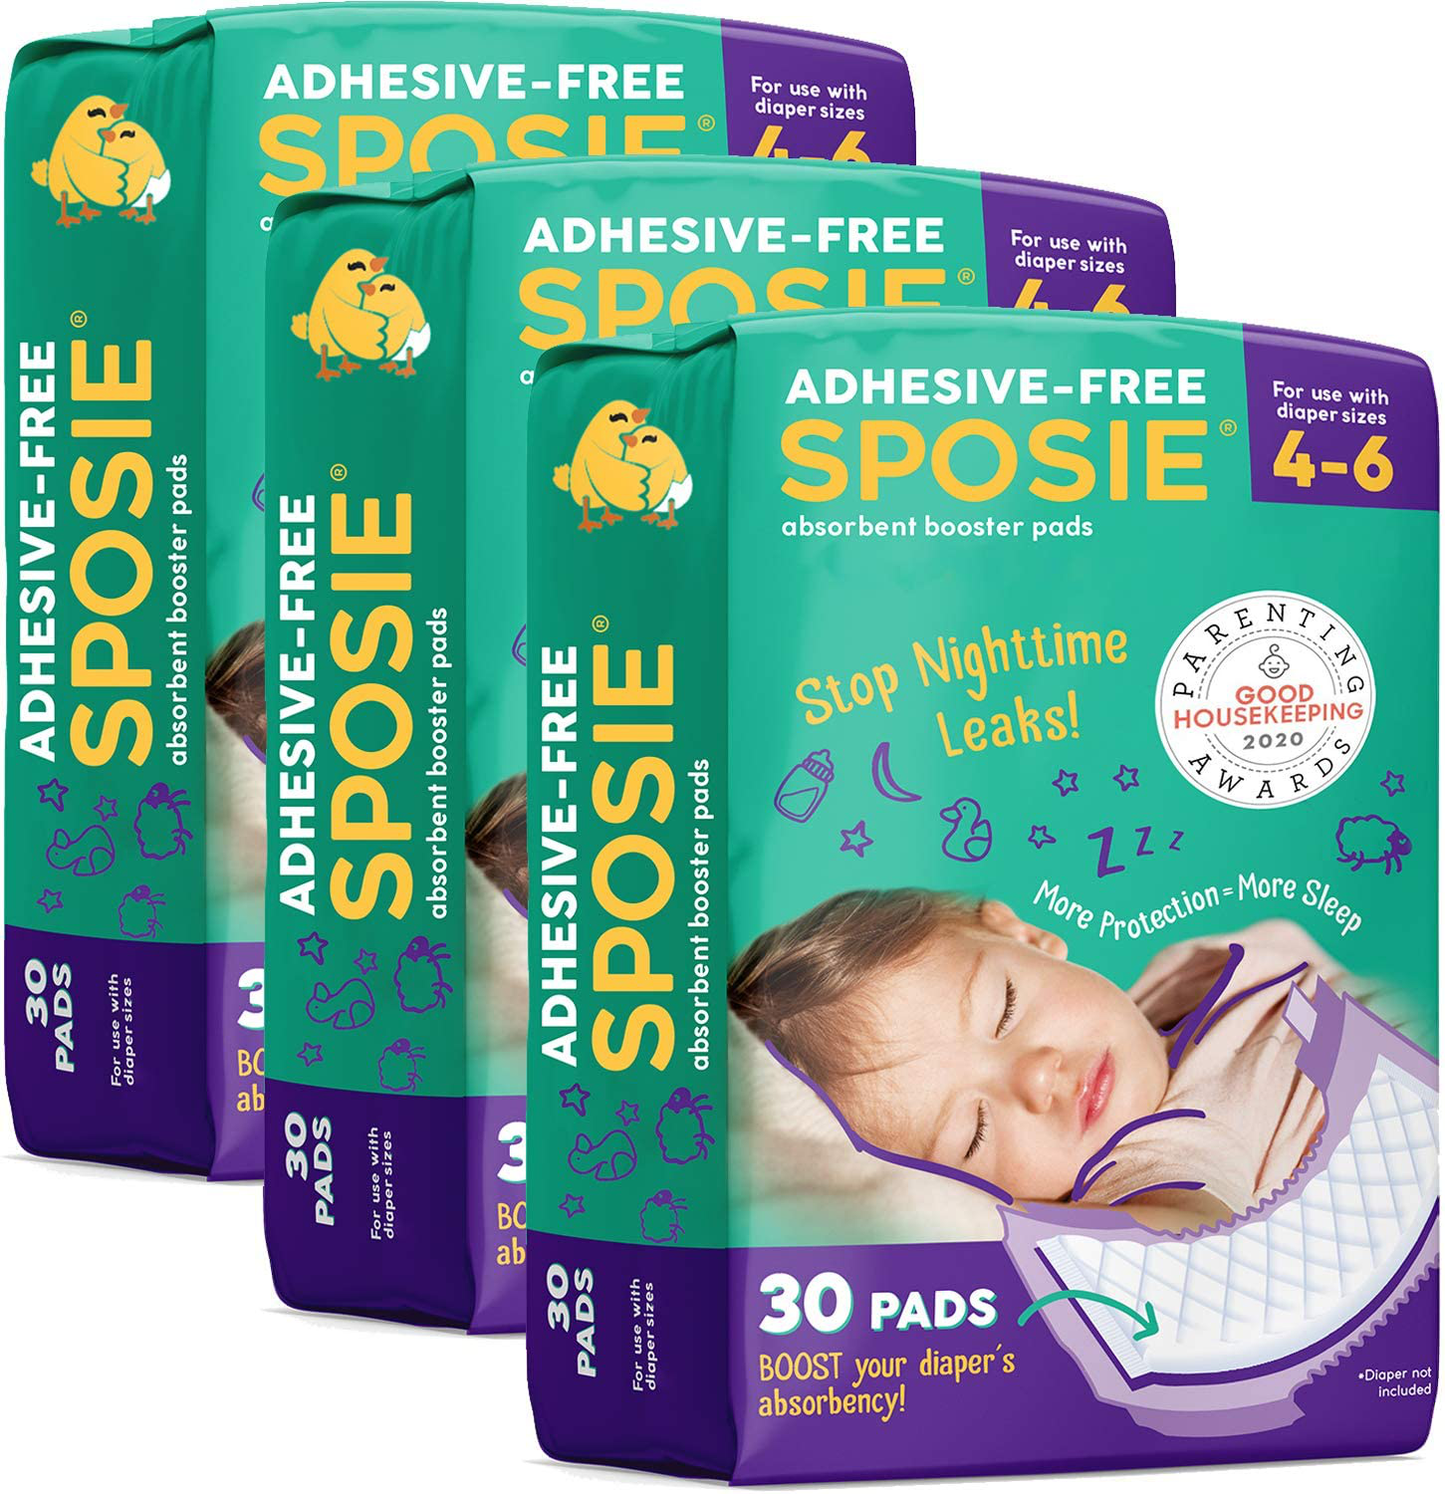 Sposie Overnight Diaper Booster Pads, 90 Ct, No Adhesive for Easy Repositioning, Helps Stops Nighttime Leaks, Fits Diaper Sizes 4-6